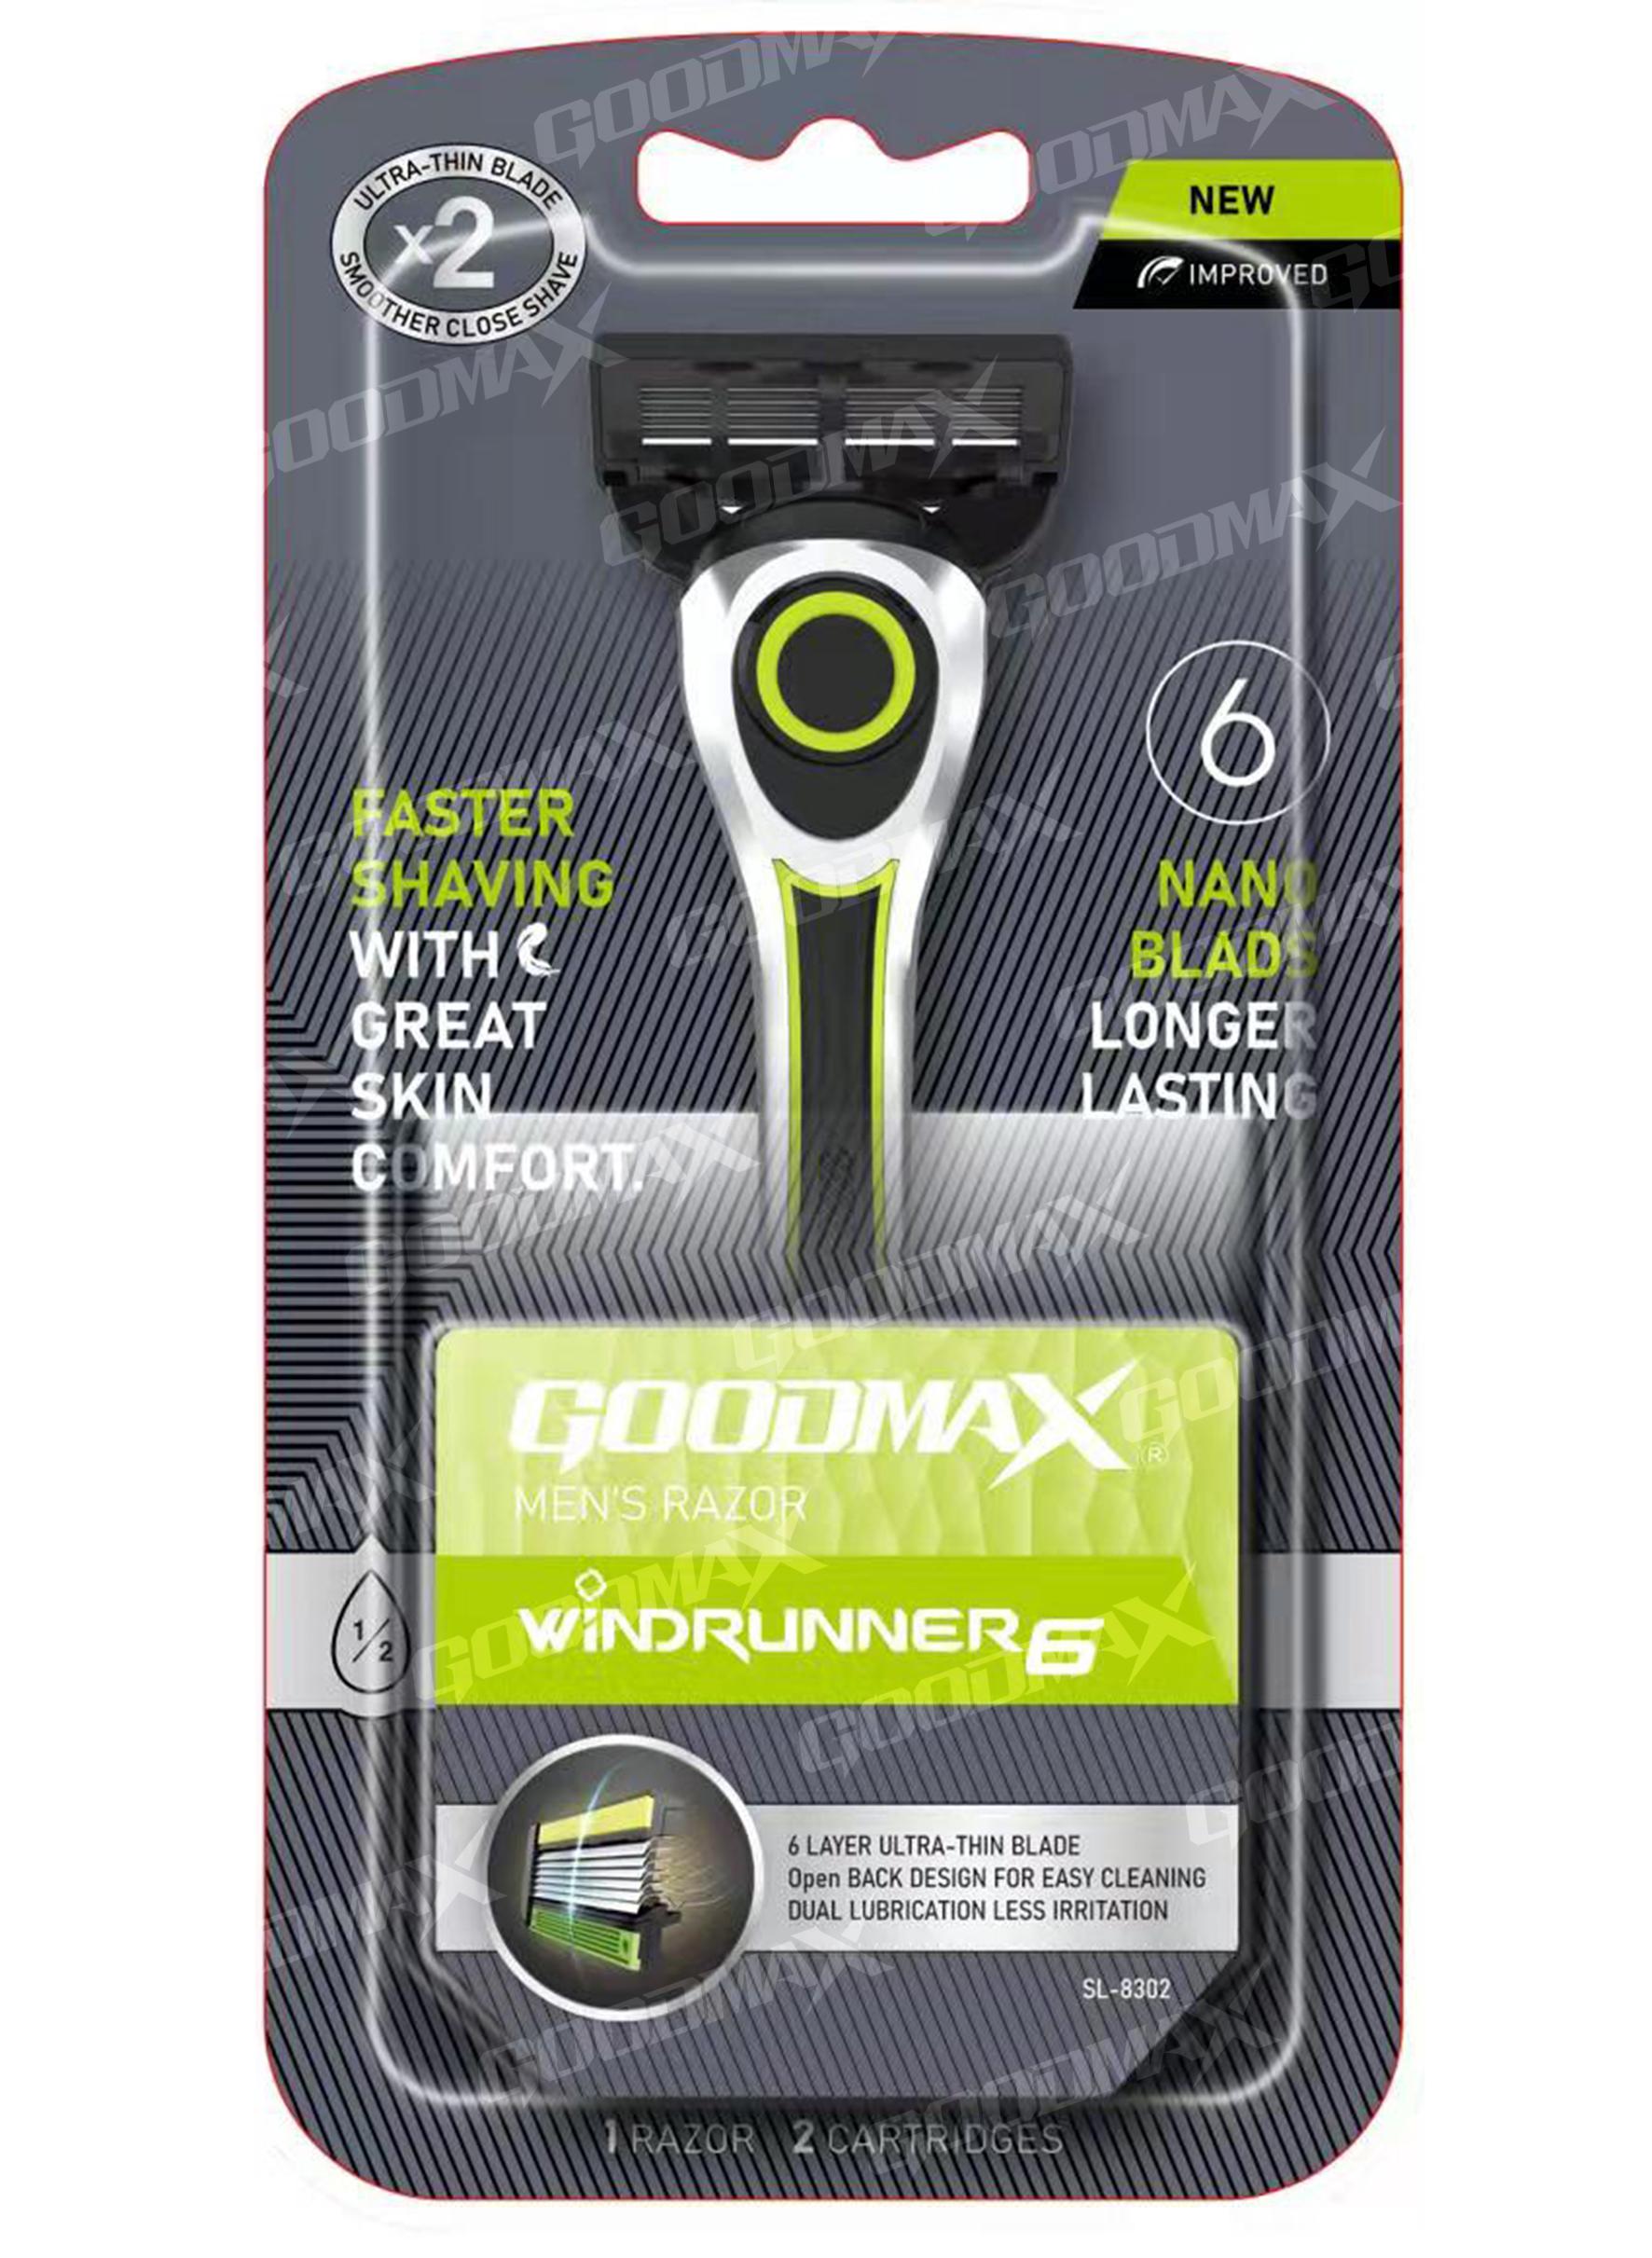 GOODMAX the right blade razors for your shaving